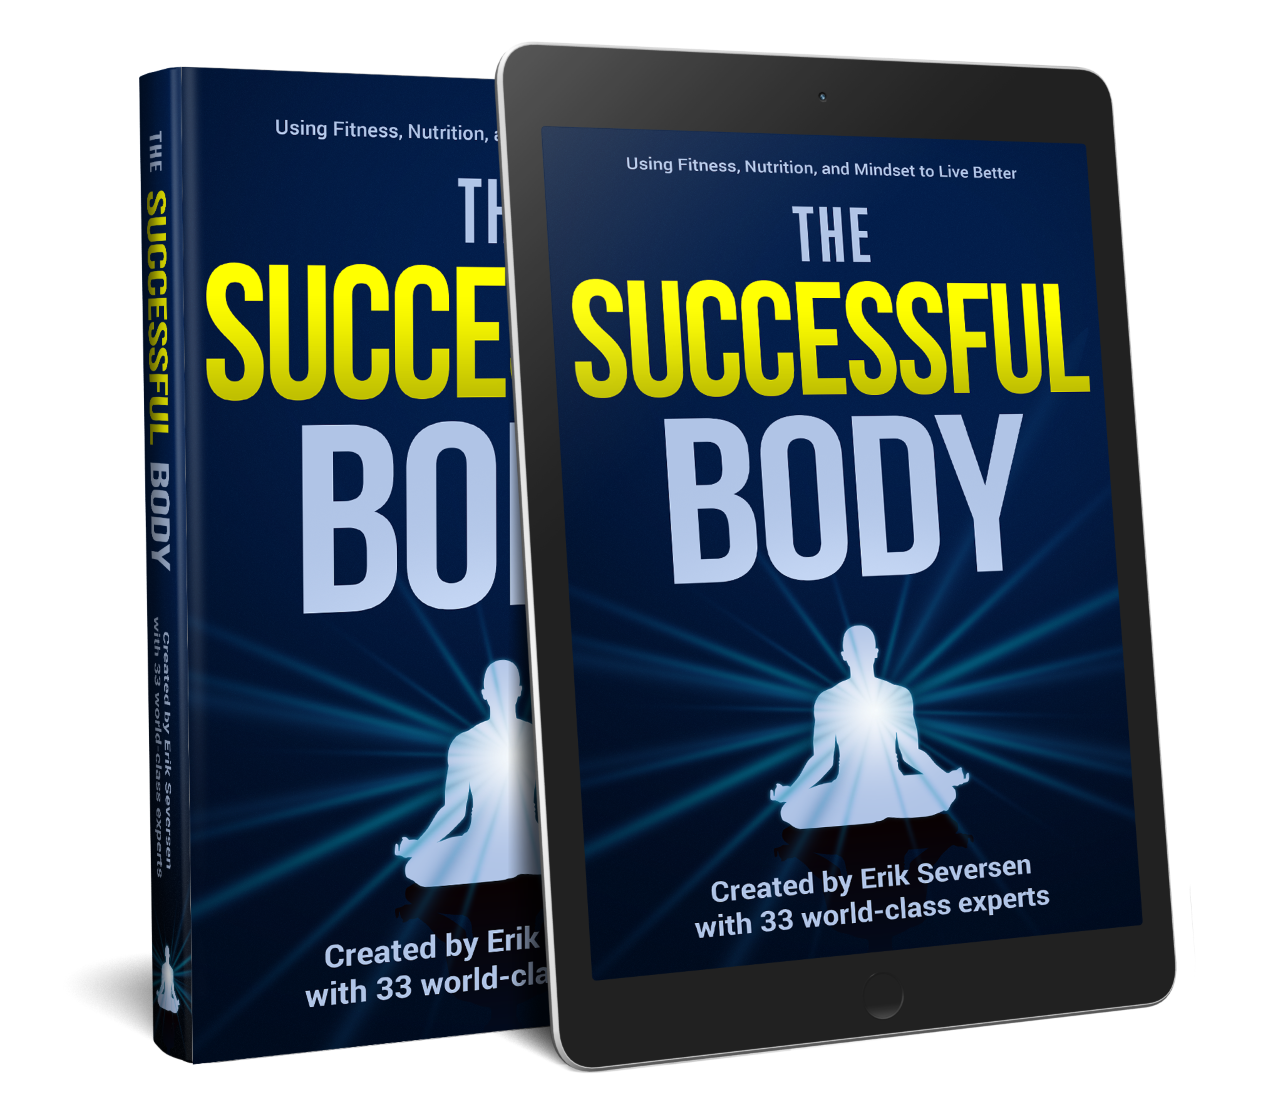 The Successful Body_3d1a BOOK COVER GRAPHIC 2.png